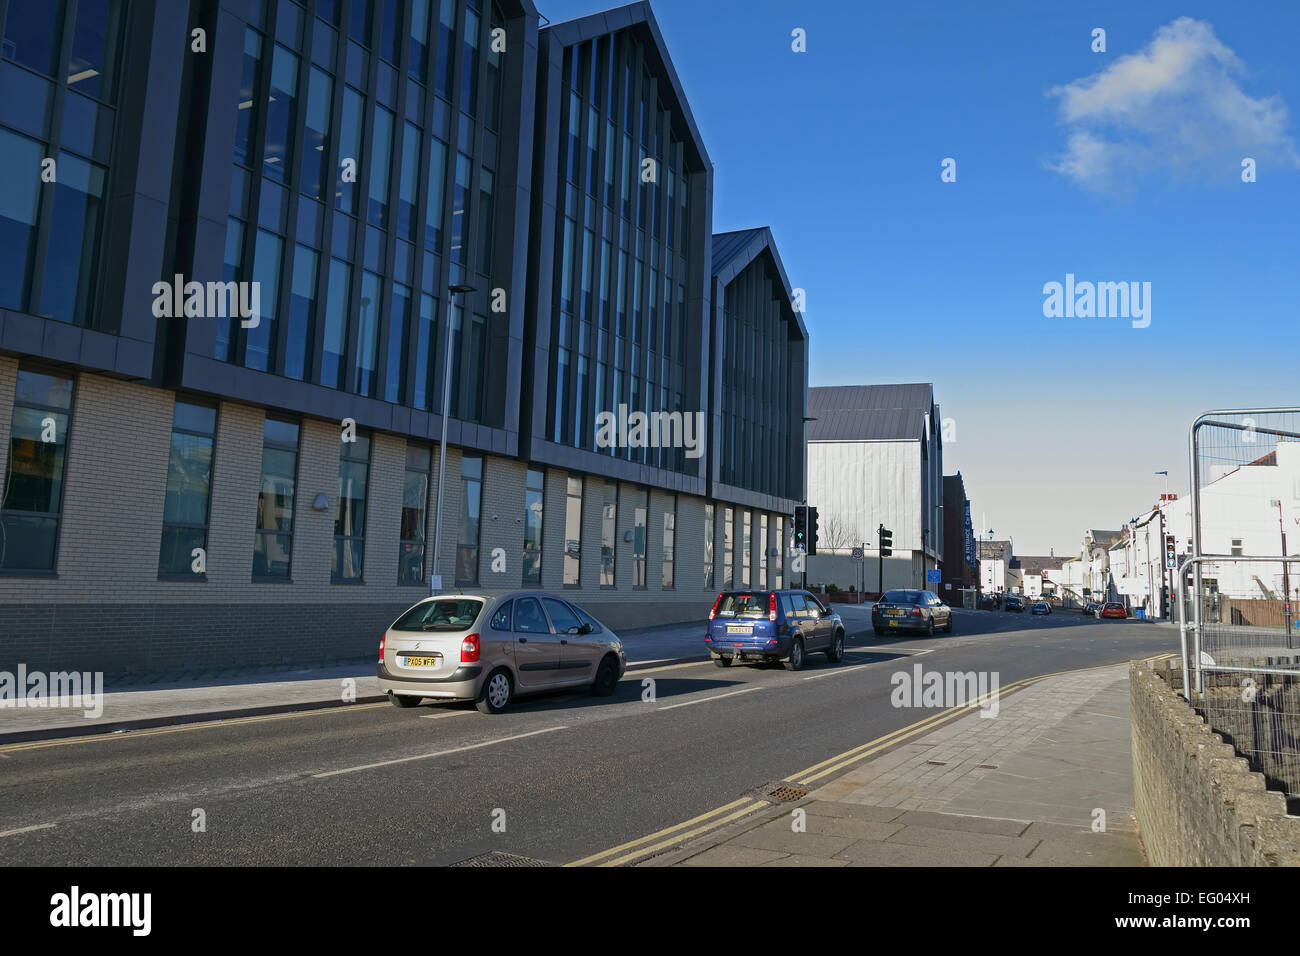 the new sellafield buildings in whitehaven west cumbria no1 and no2 Albion square Stock Photo